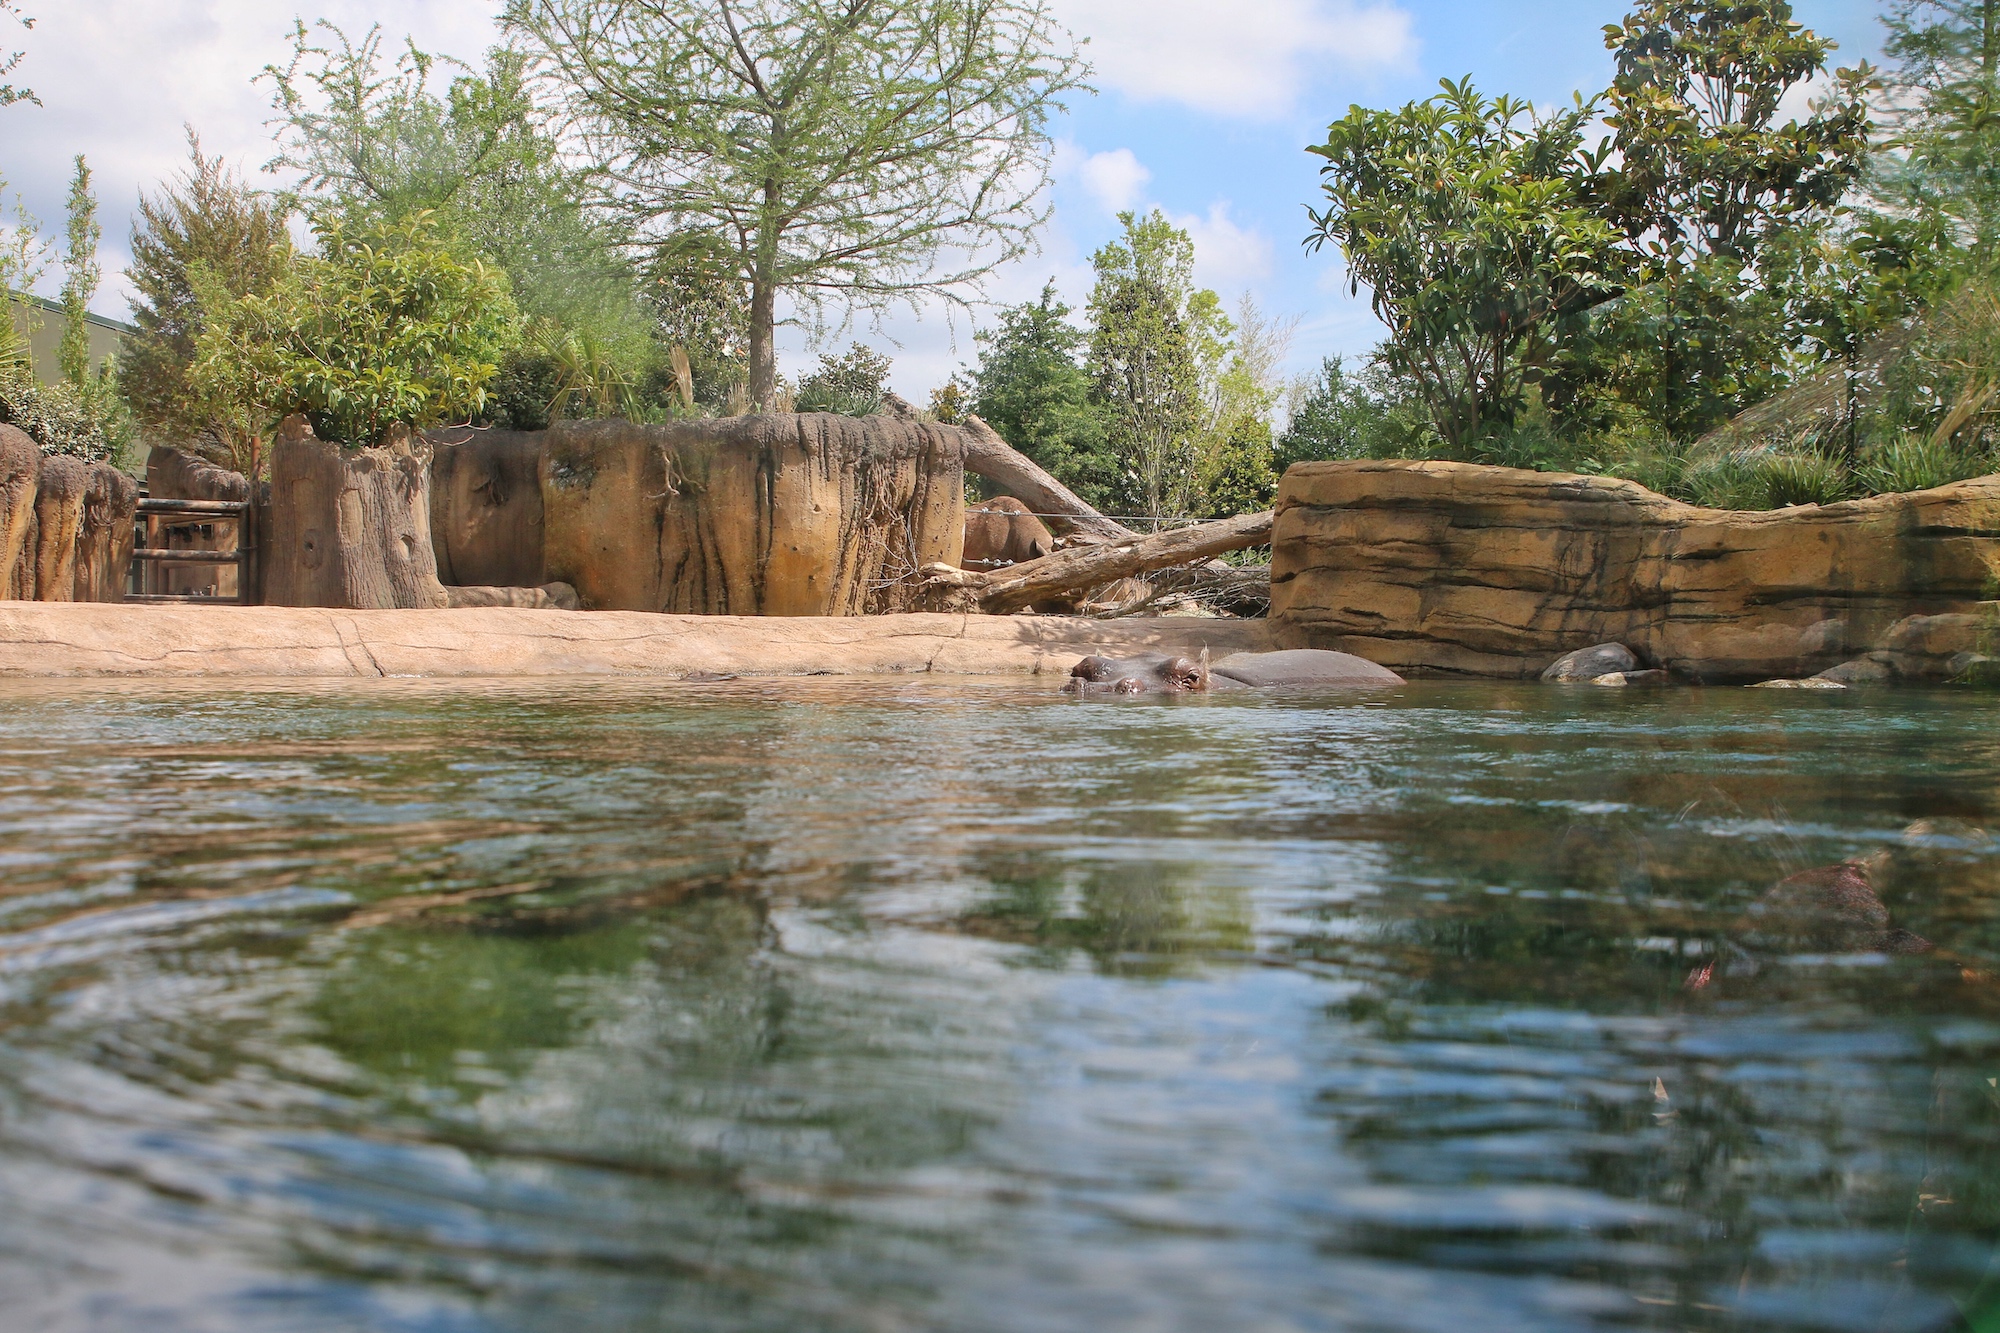 new hippo exhibit at Fort Worth zoo